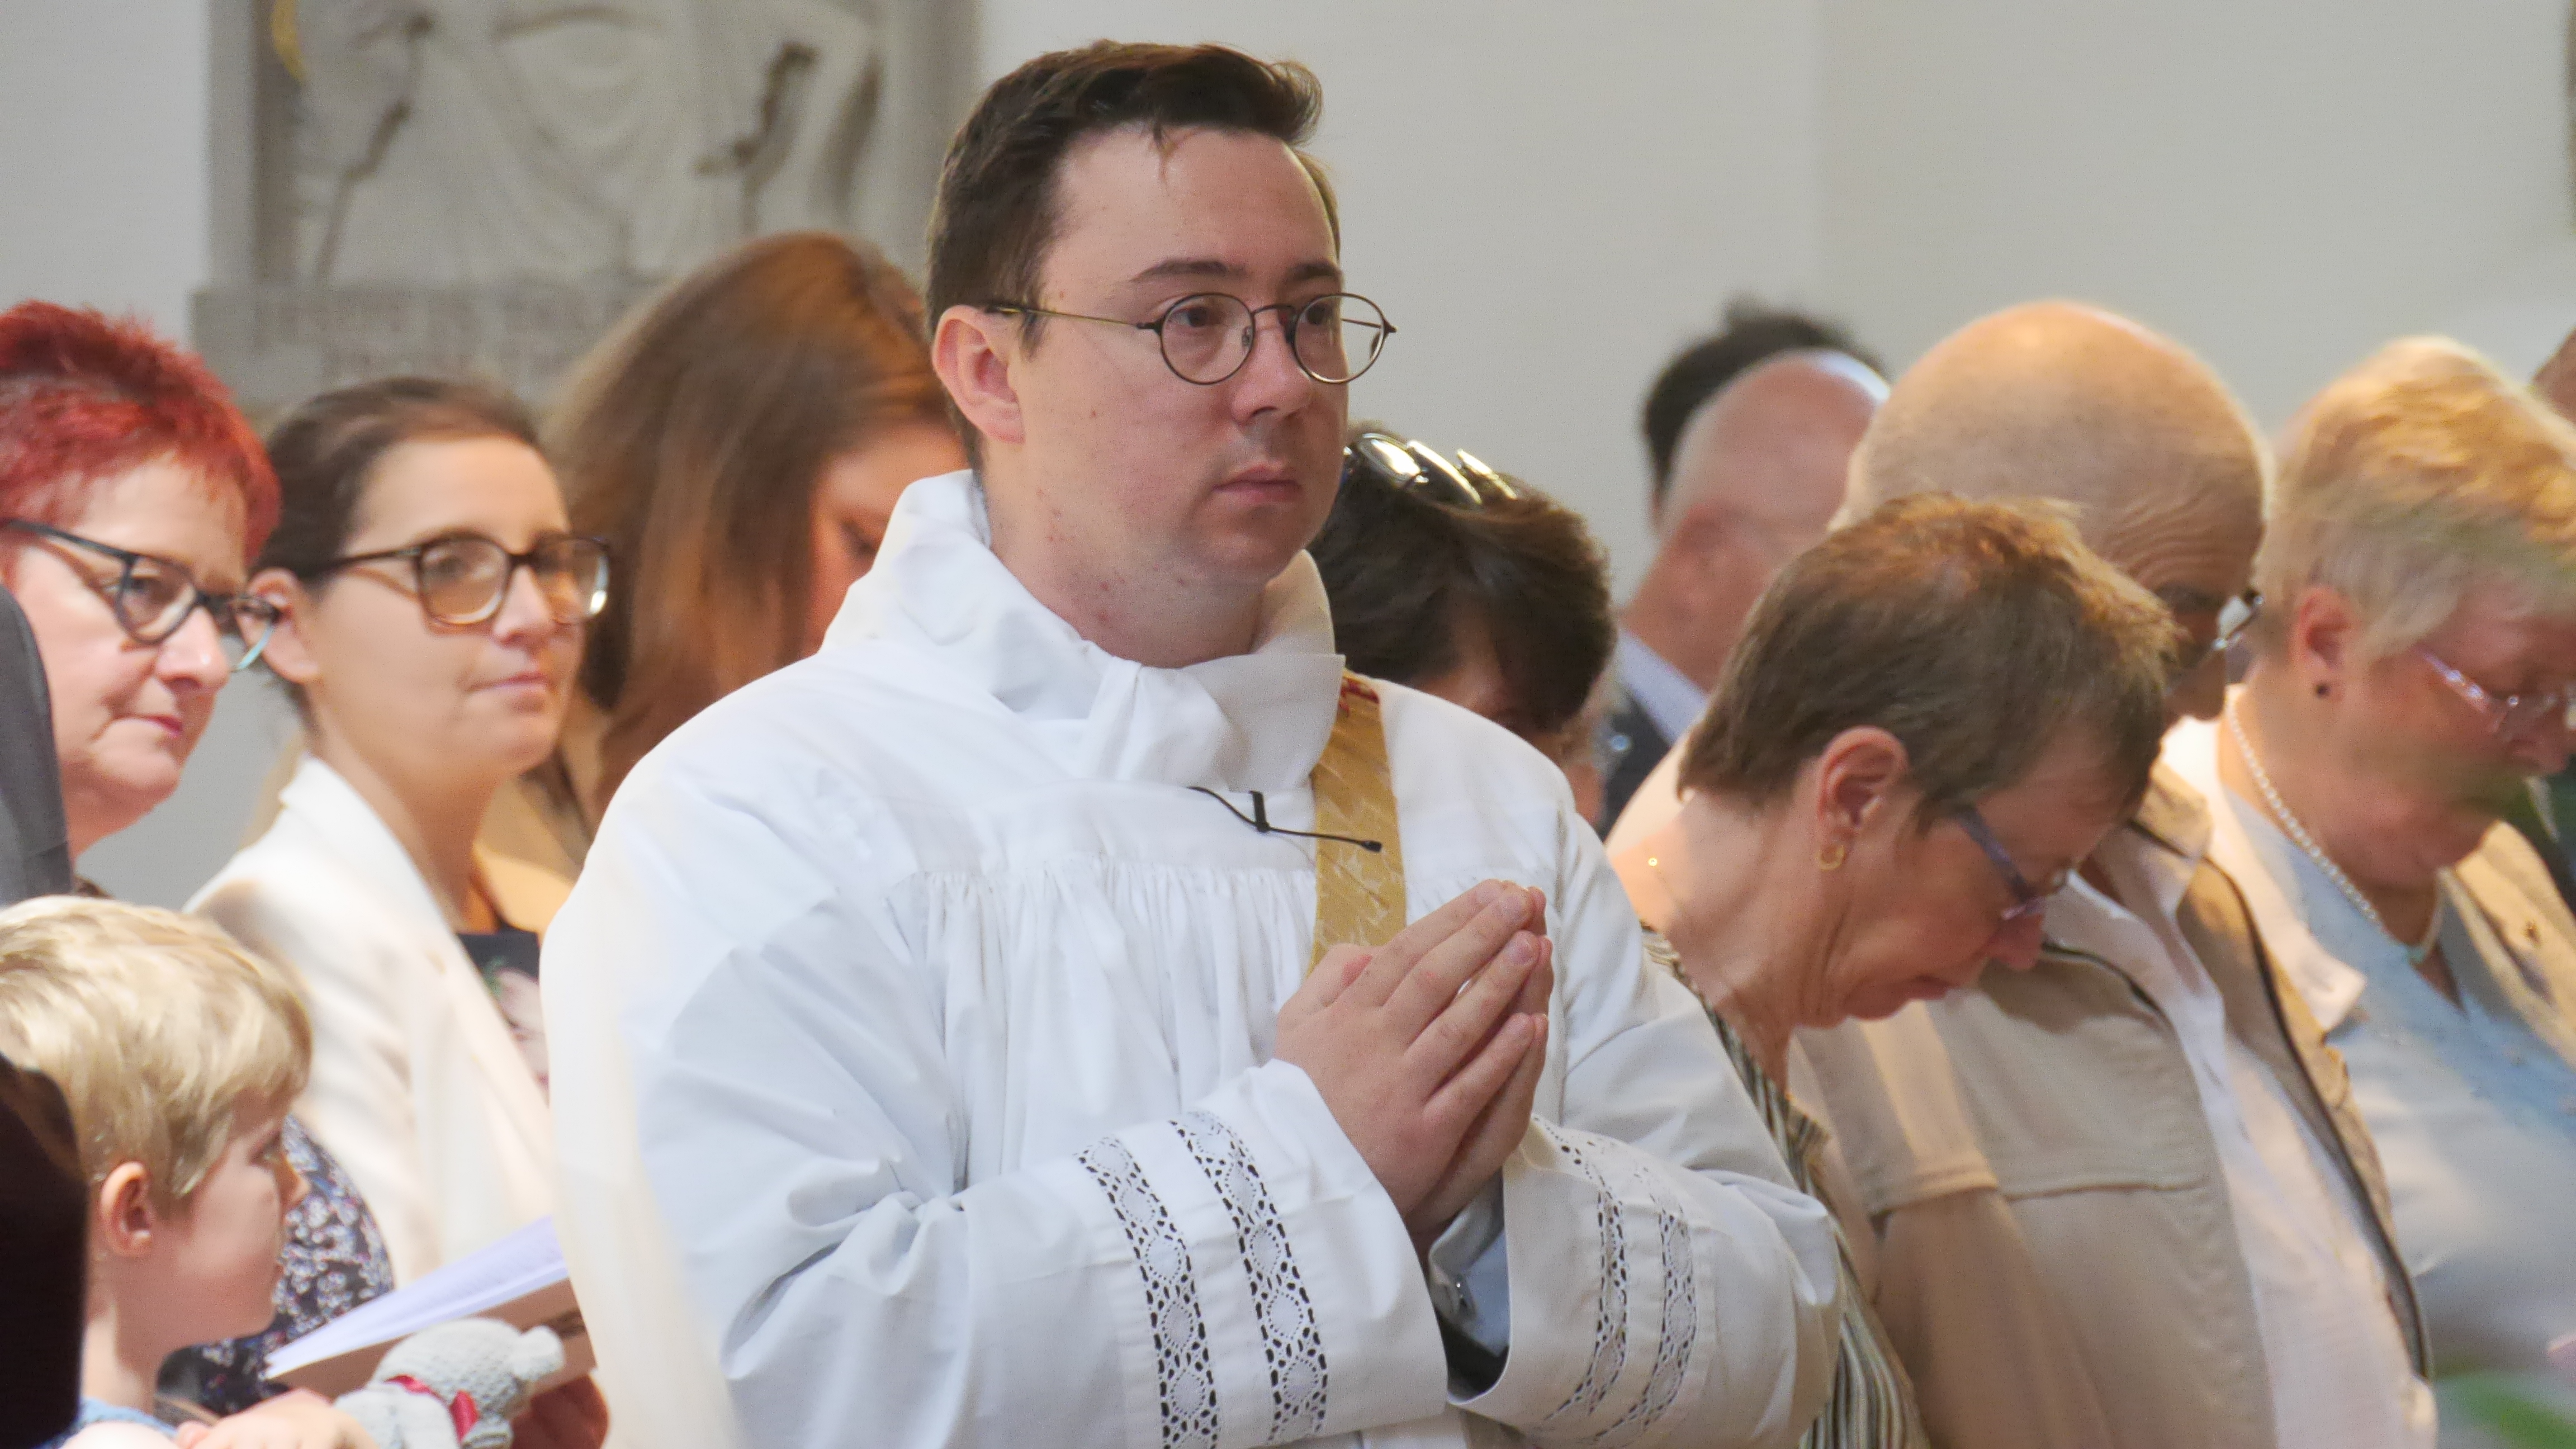 Deacon James joins his mother, other family and friends in the pews of Plymouth Cathedral